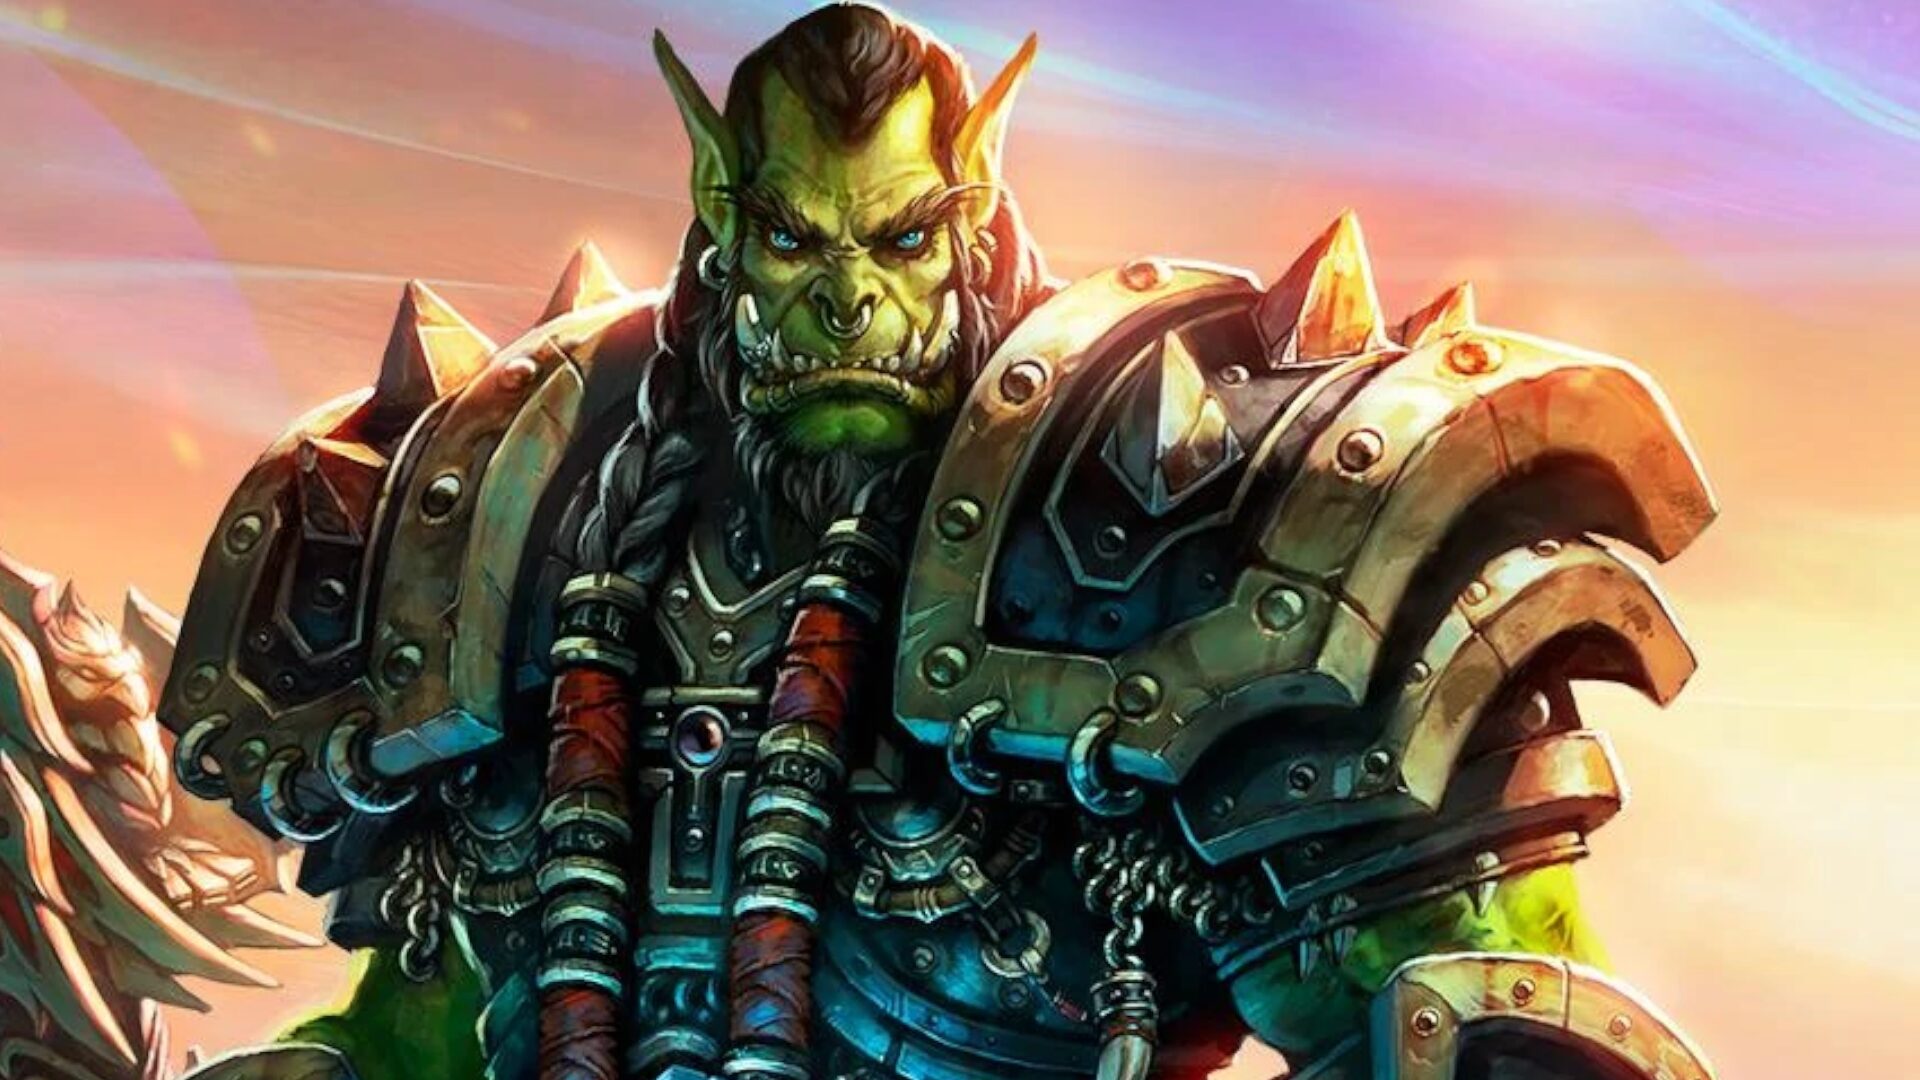 Thrall, who was once the Warchief of the Horde